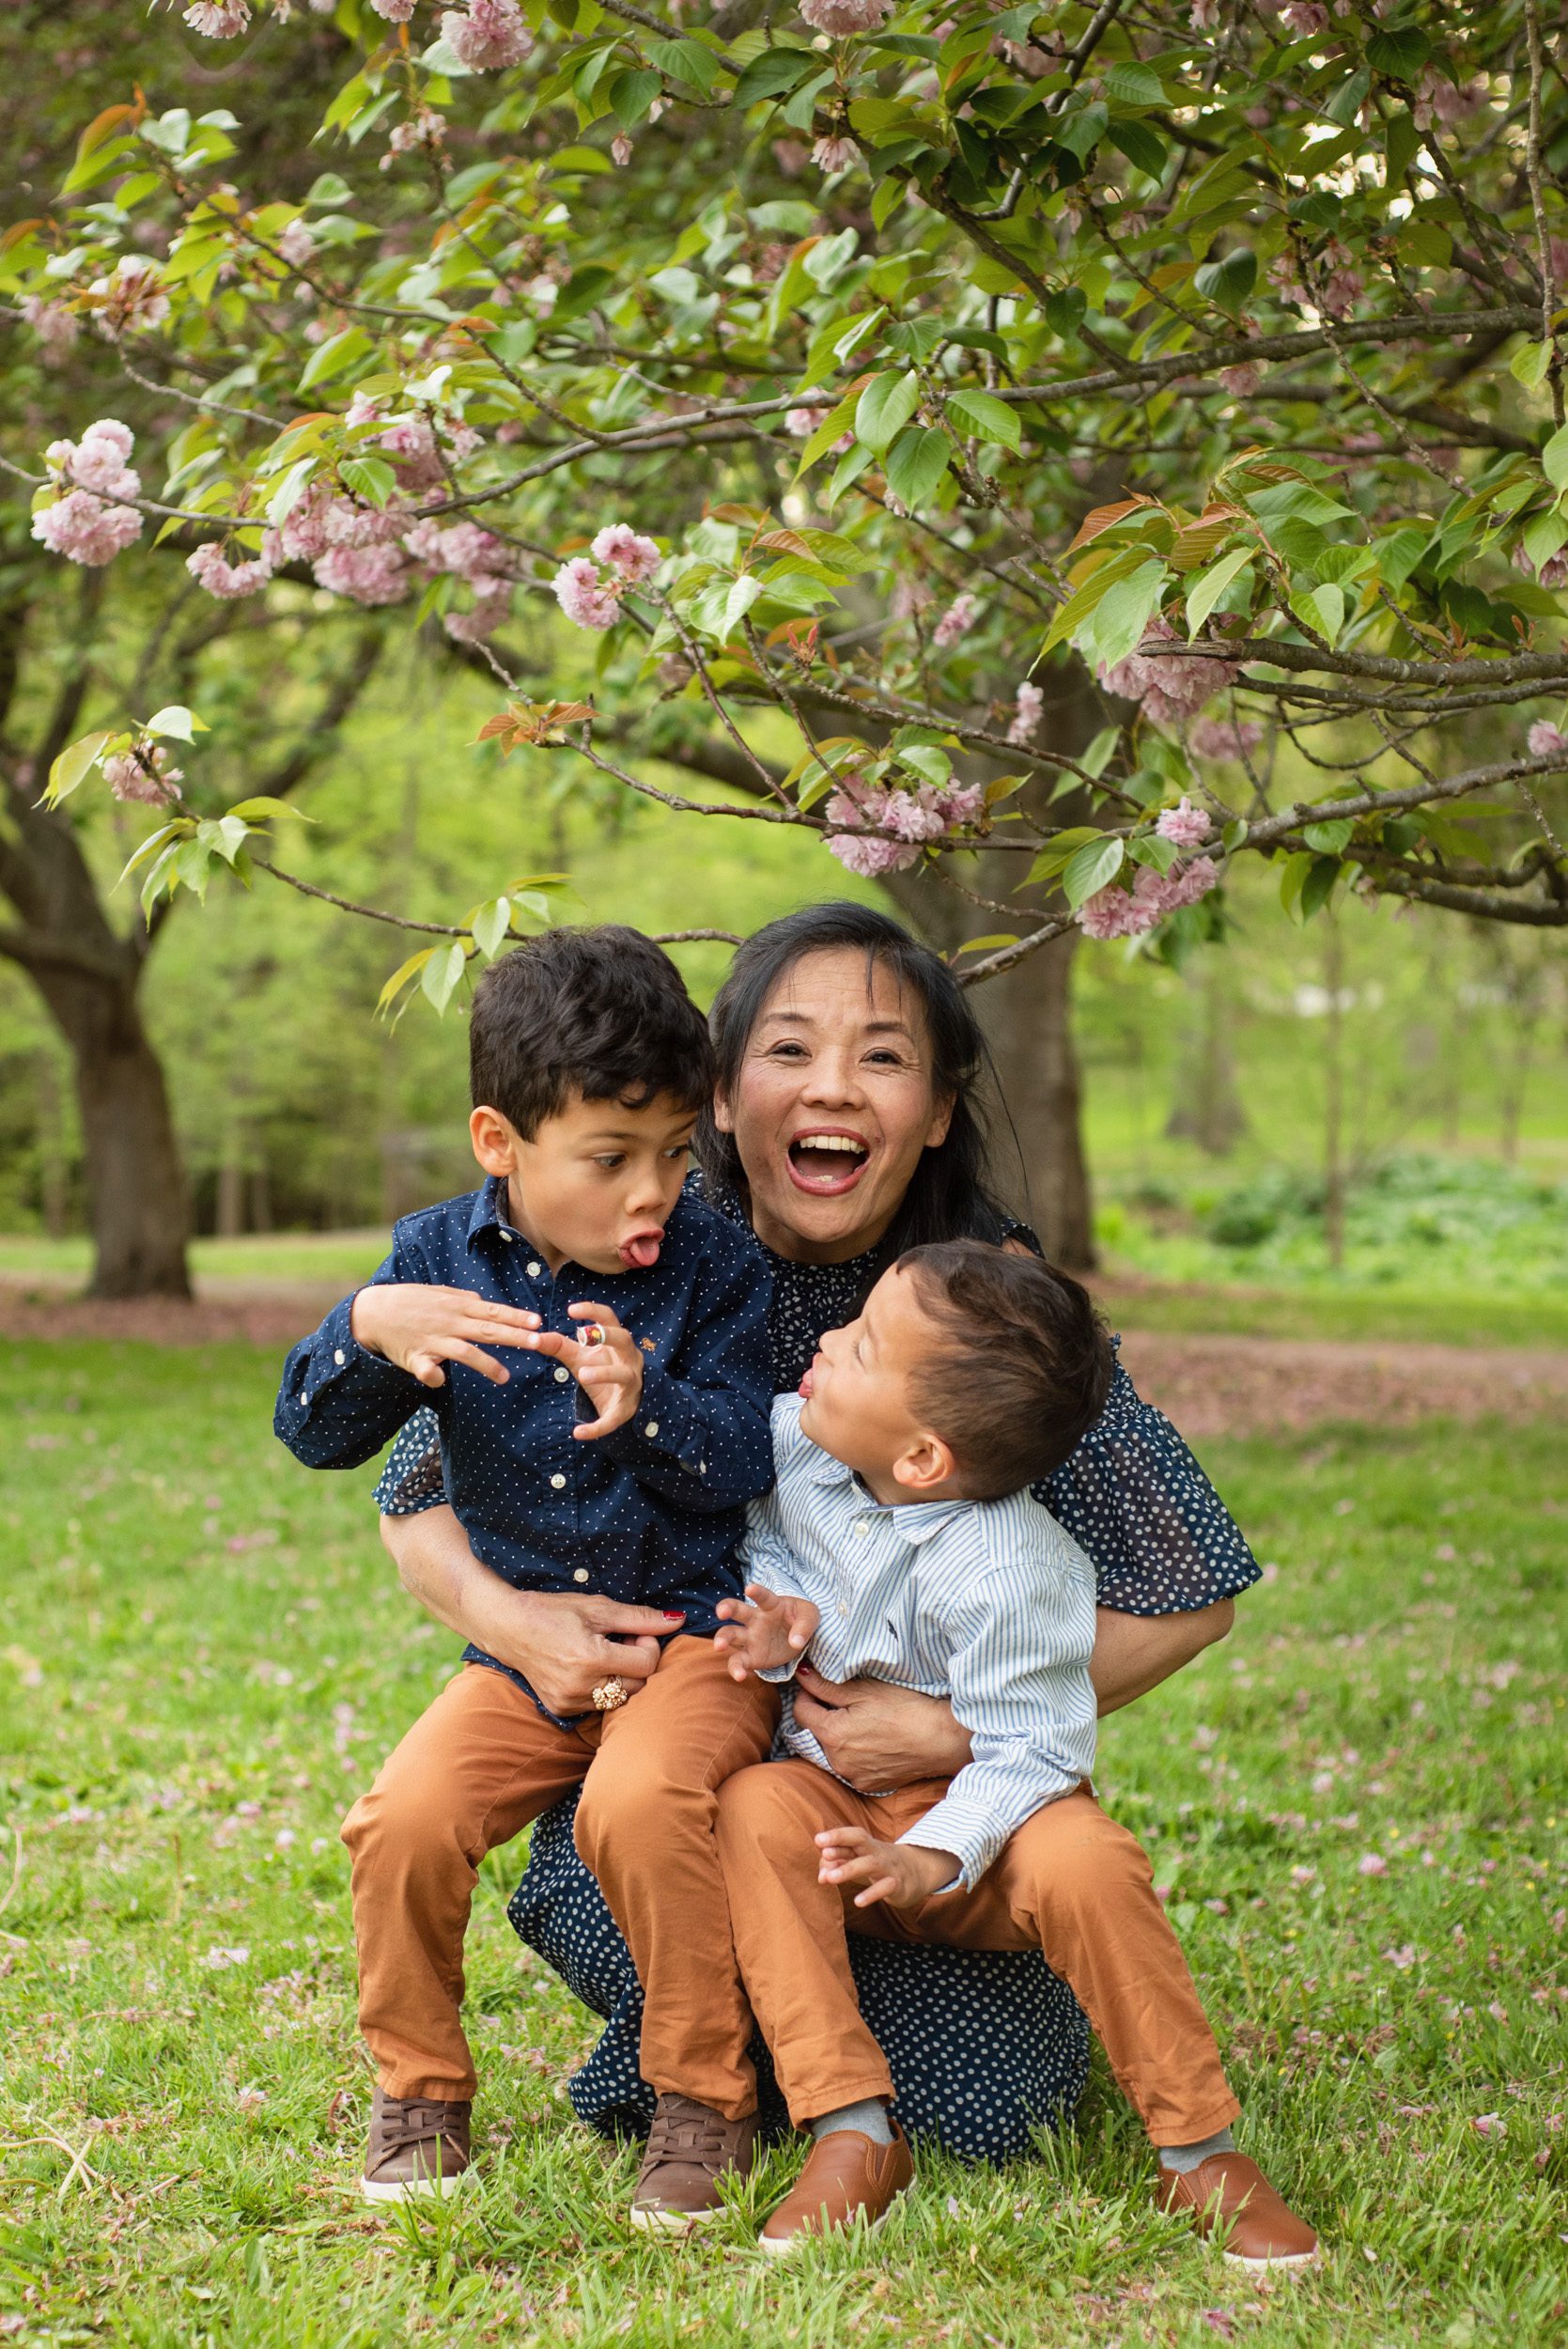 A grandmother laughing while her two grandsons make silly faces at each other on her lap during an extended family photo session